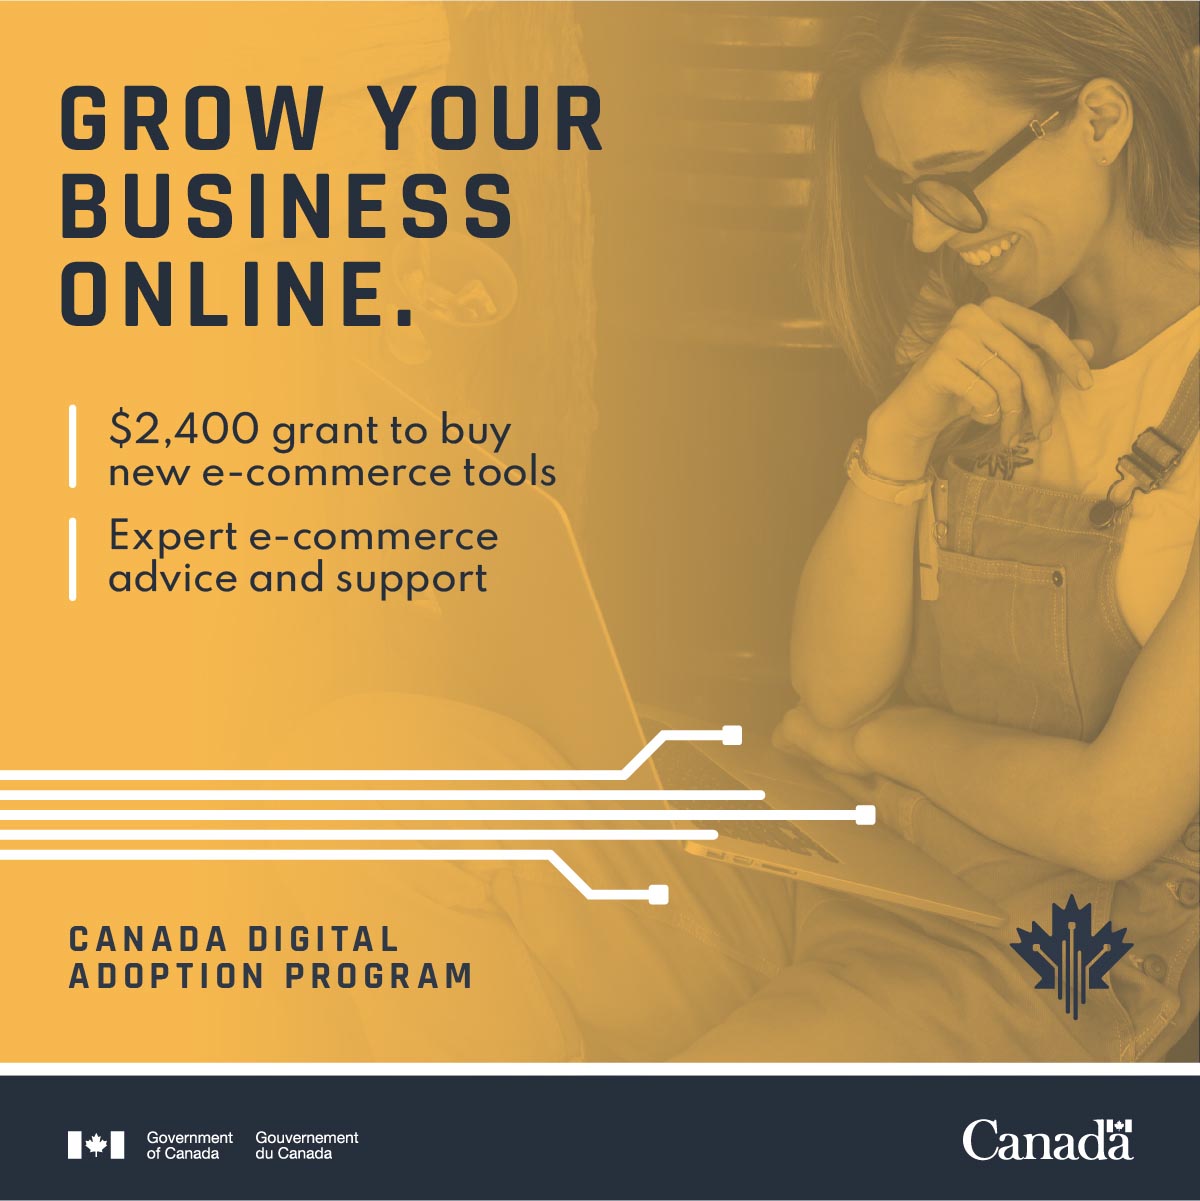 Grow Your Business Online. $2,400 grant to buy new e-commerce tools. Expert e-commerce advice and support. Canada Digital Adoption Program